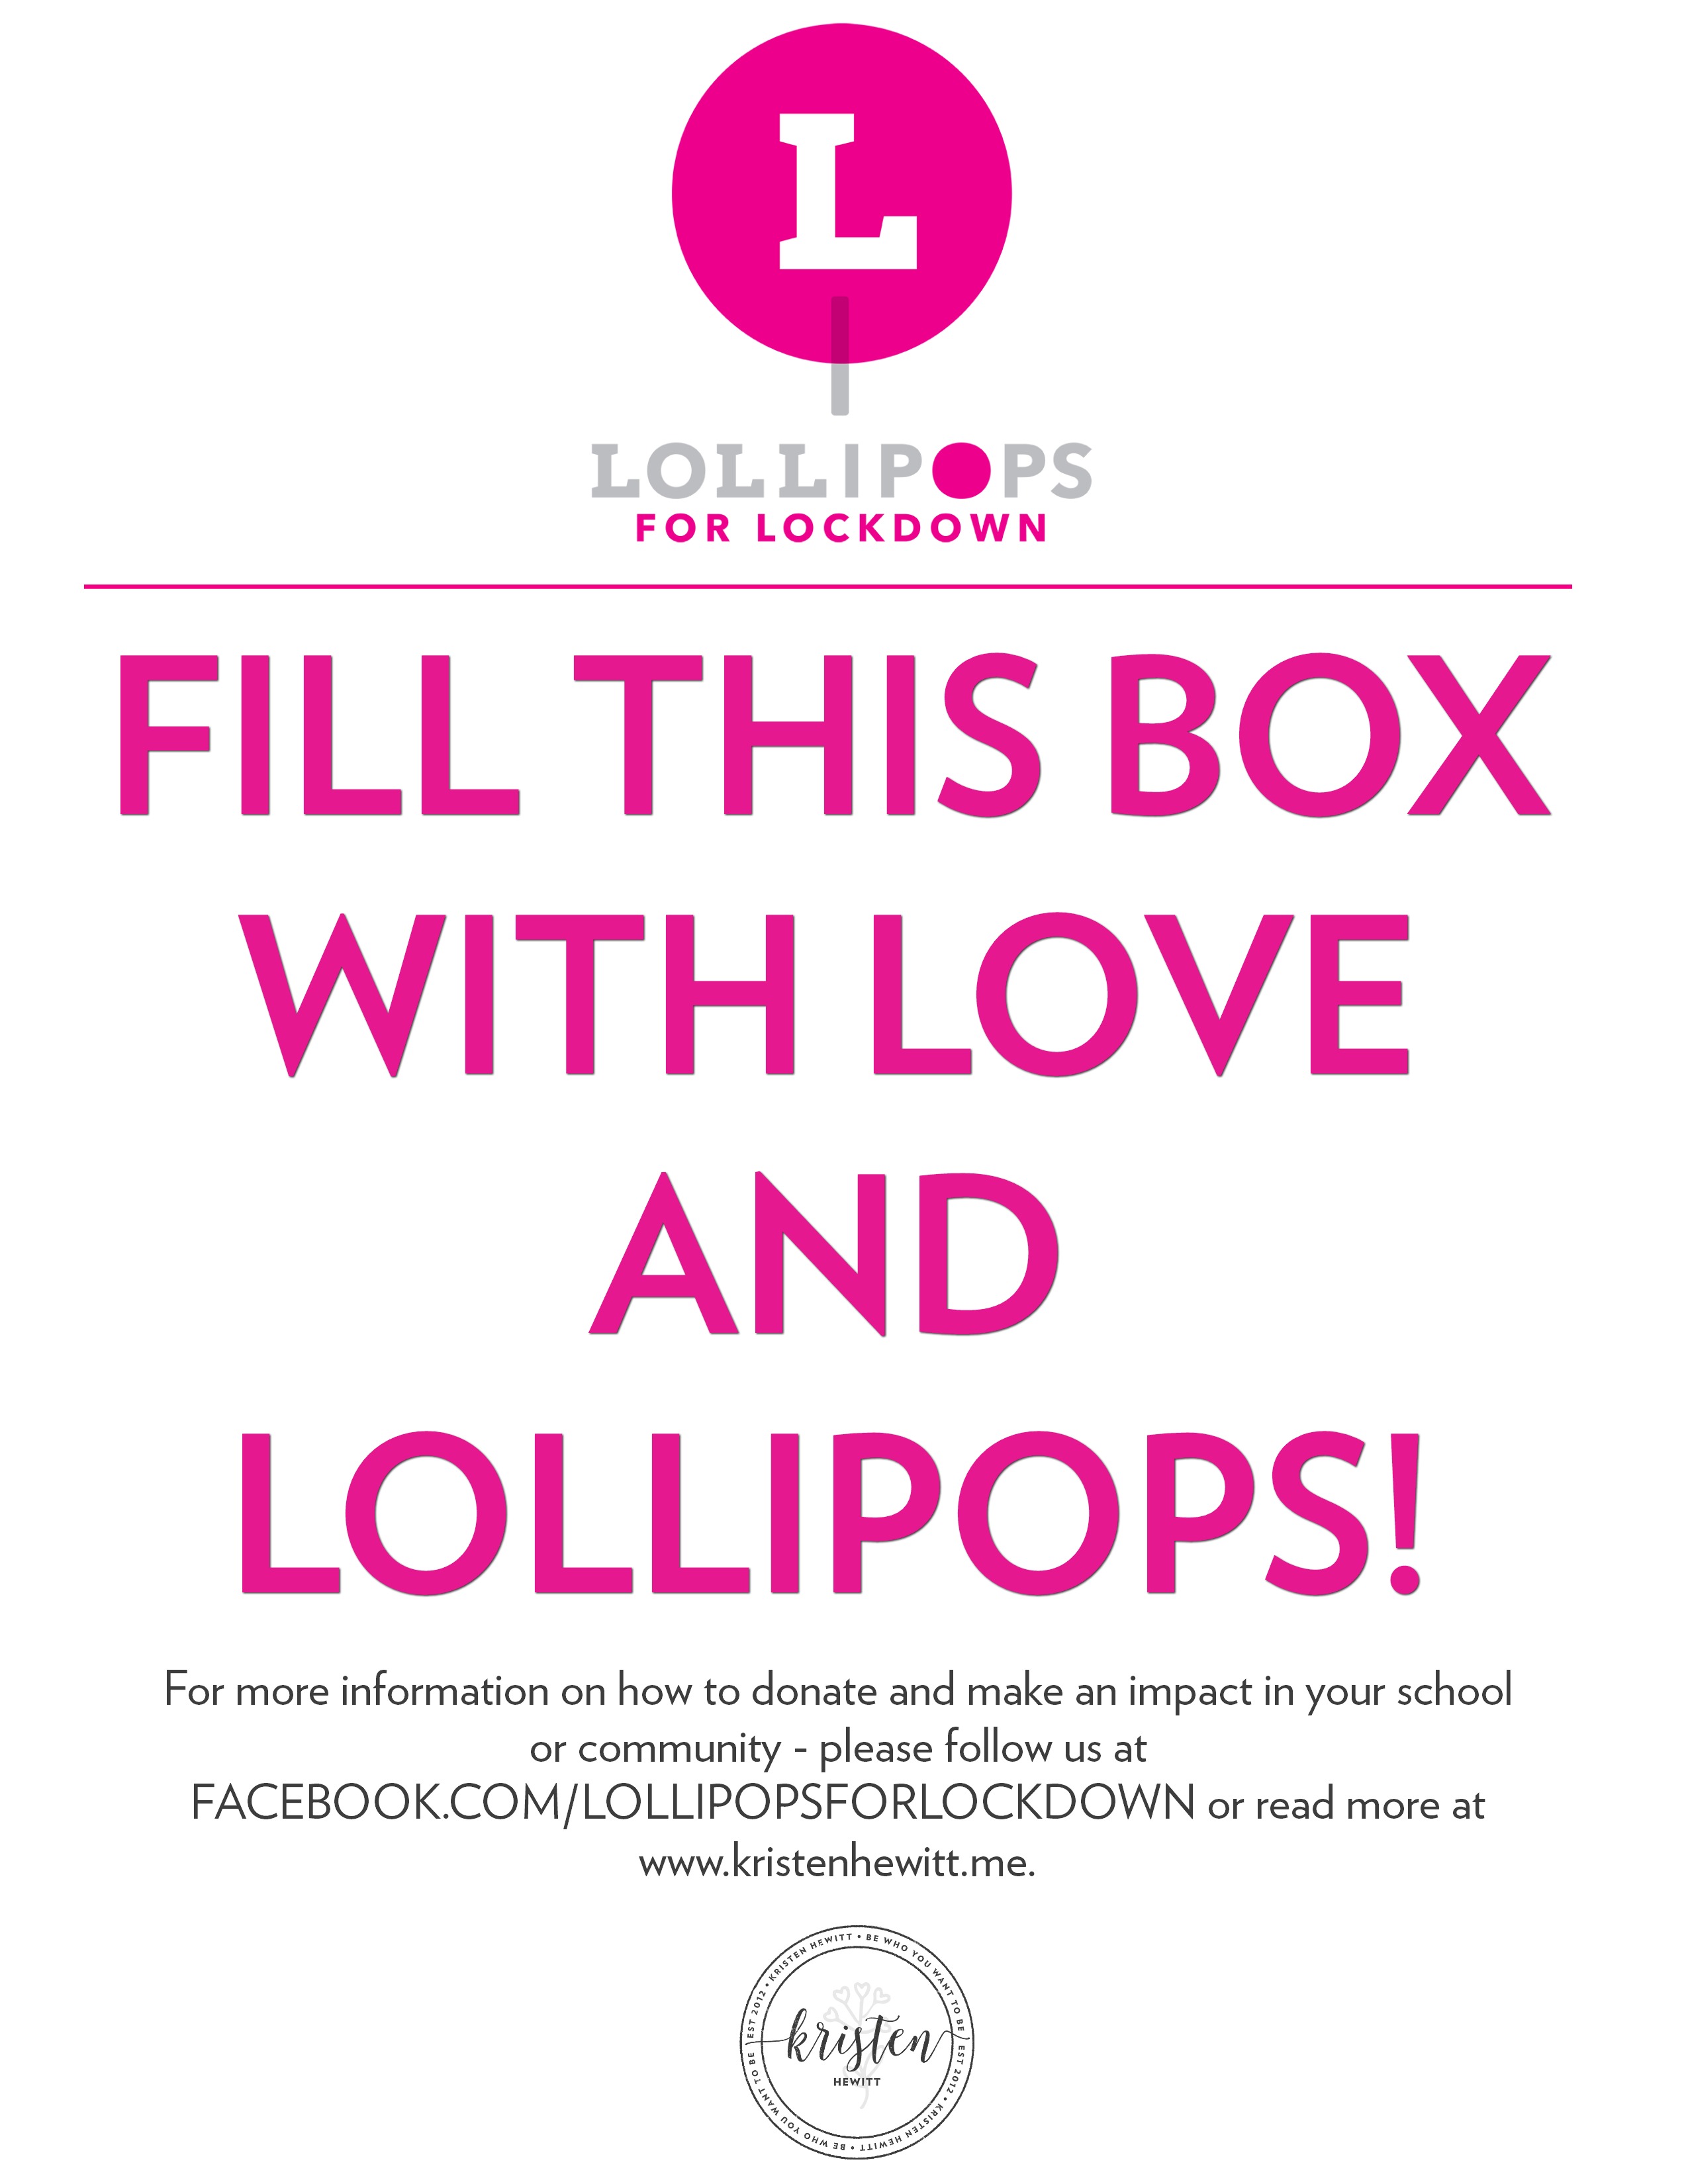 Looking for ways to help our schools during these troubled times? Then join us at Lollipops for Lockdowns and let's give our teachers and kids something simple to help make lockdown drills easier.